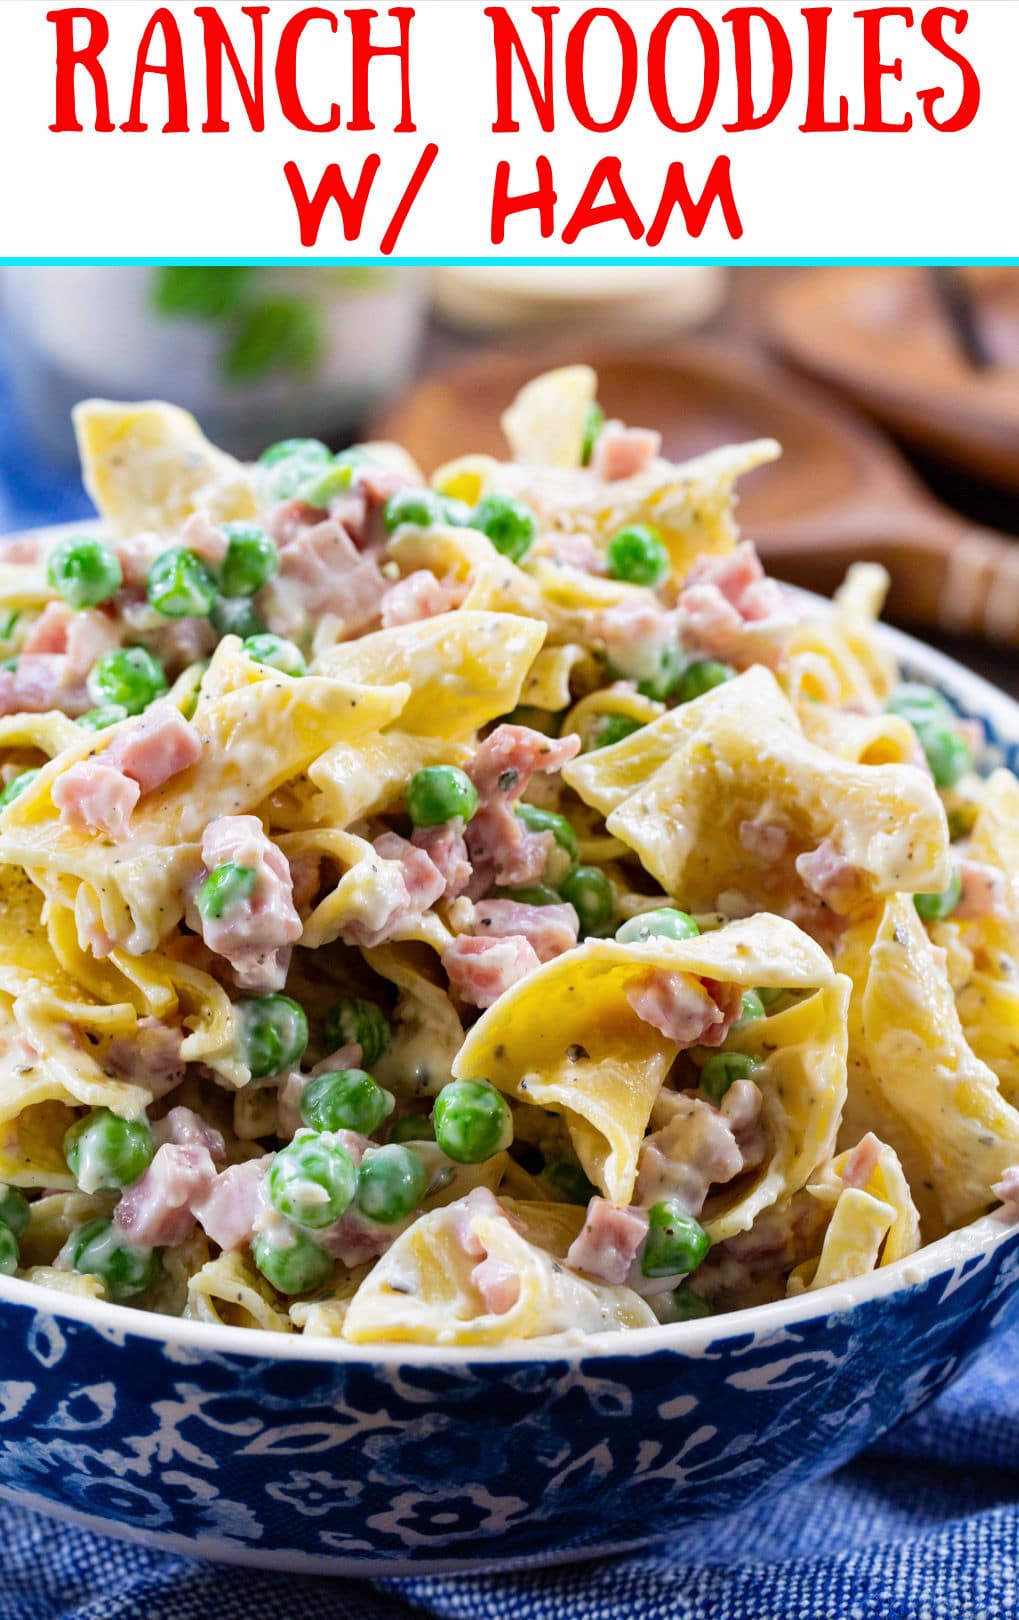 Ranch Noodles with Ham in a serving bowl.